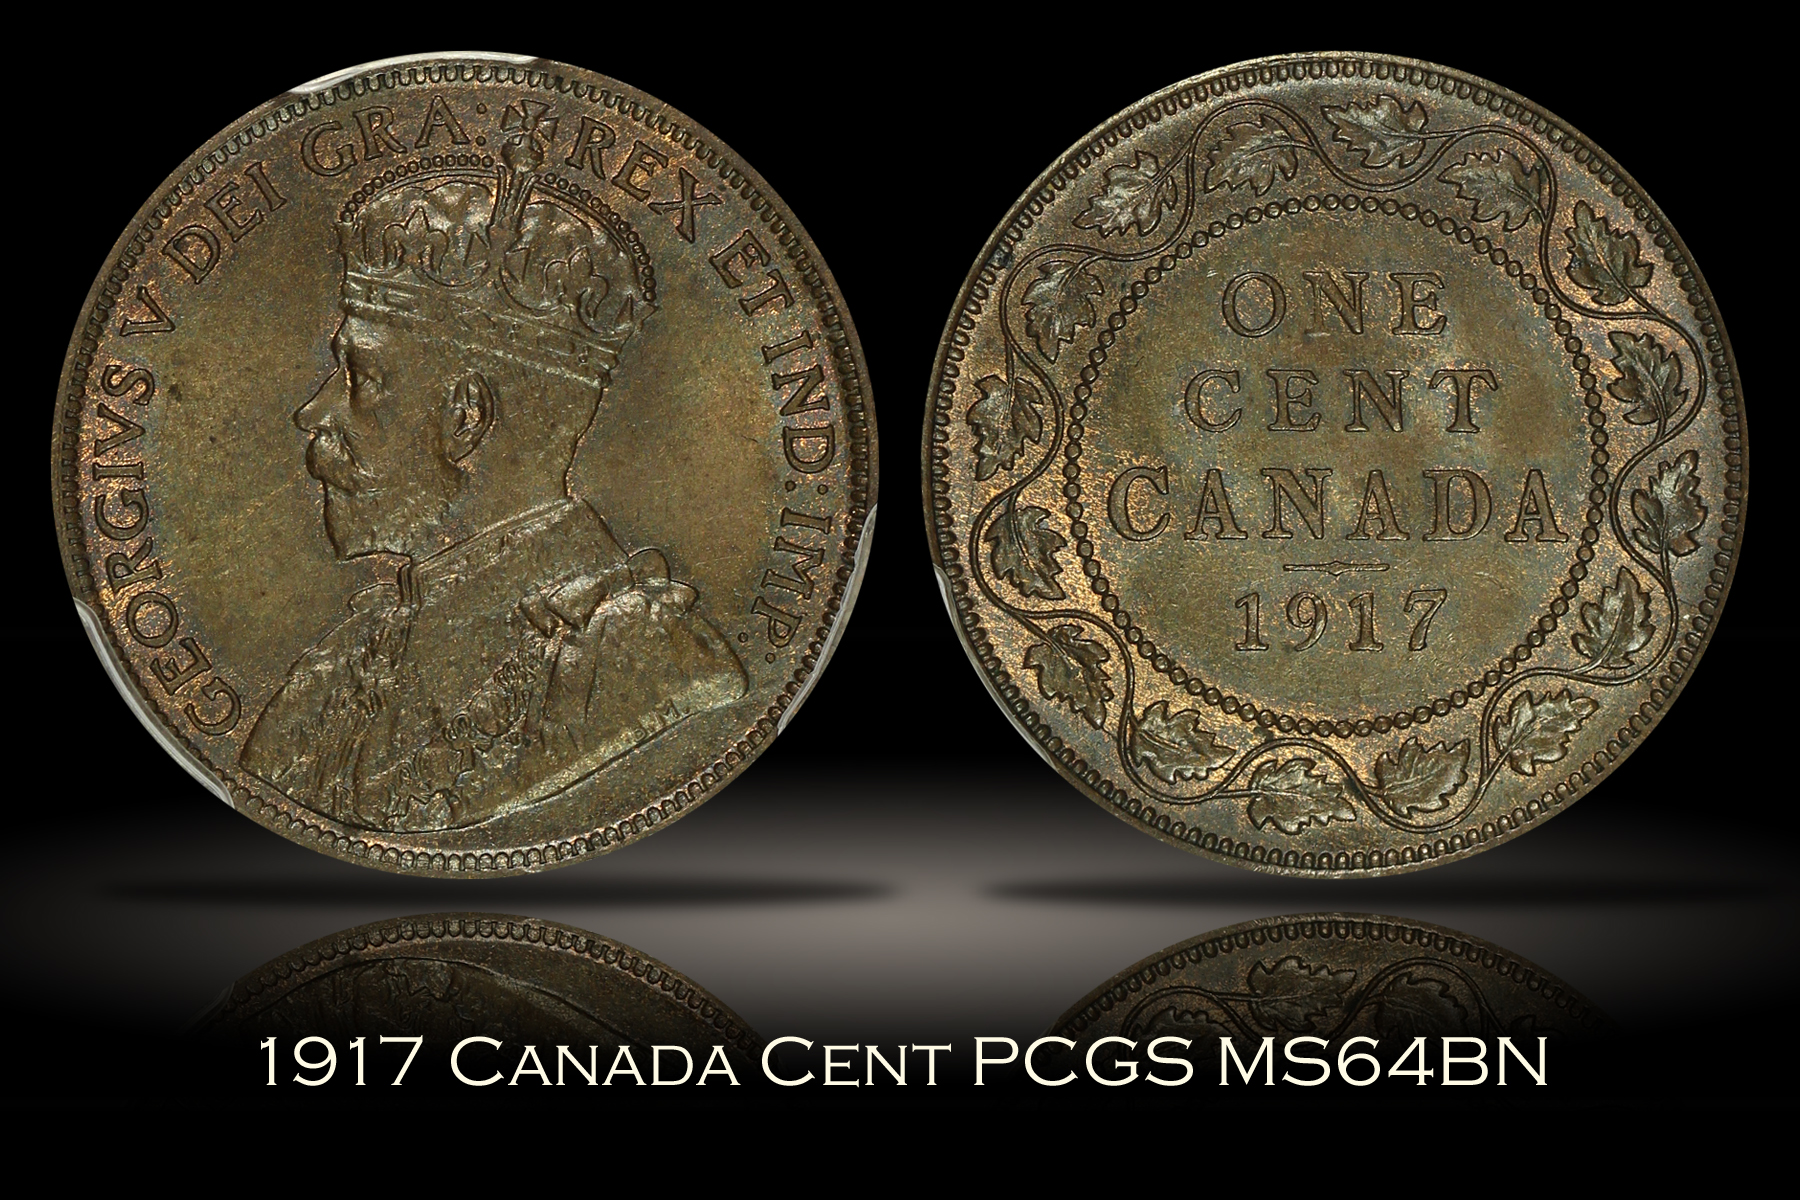 1917 Canada Cent PCGS MS64BN